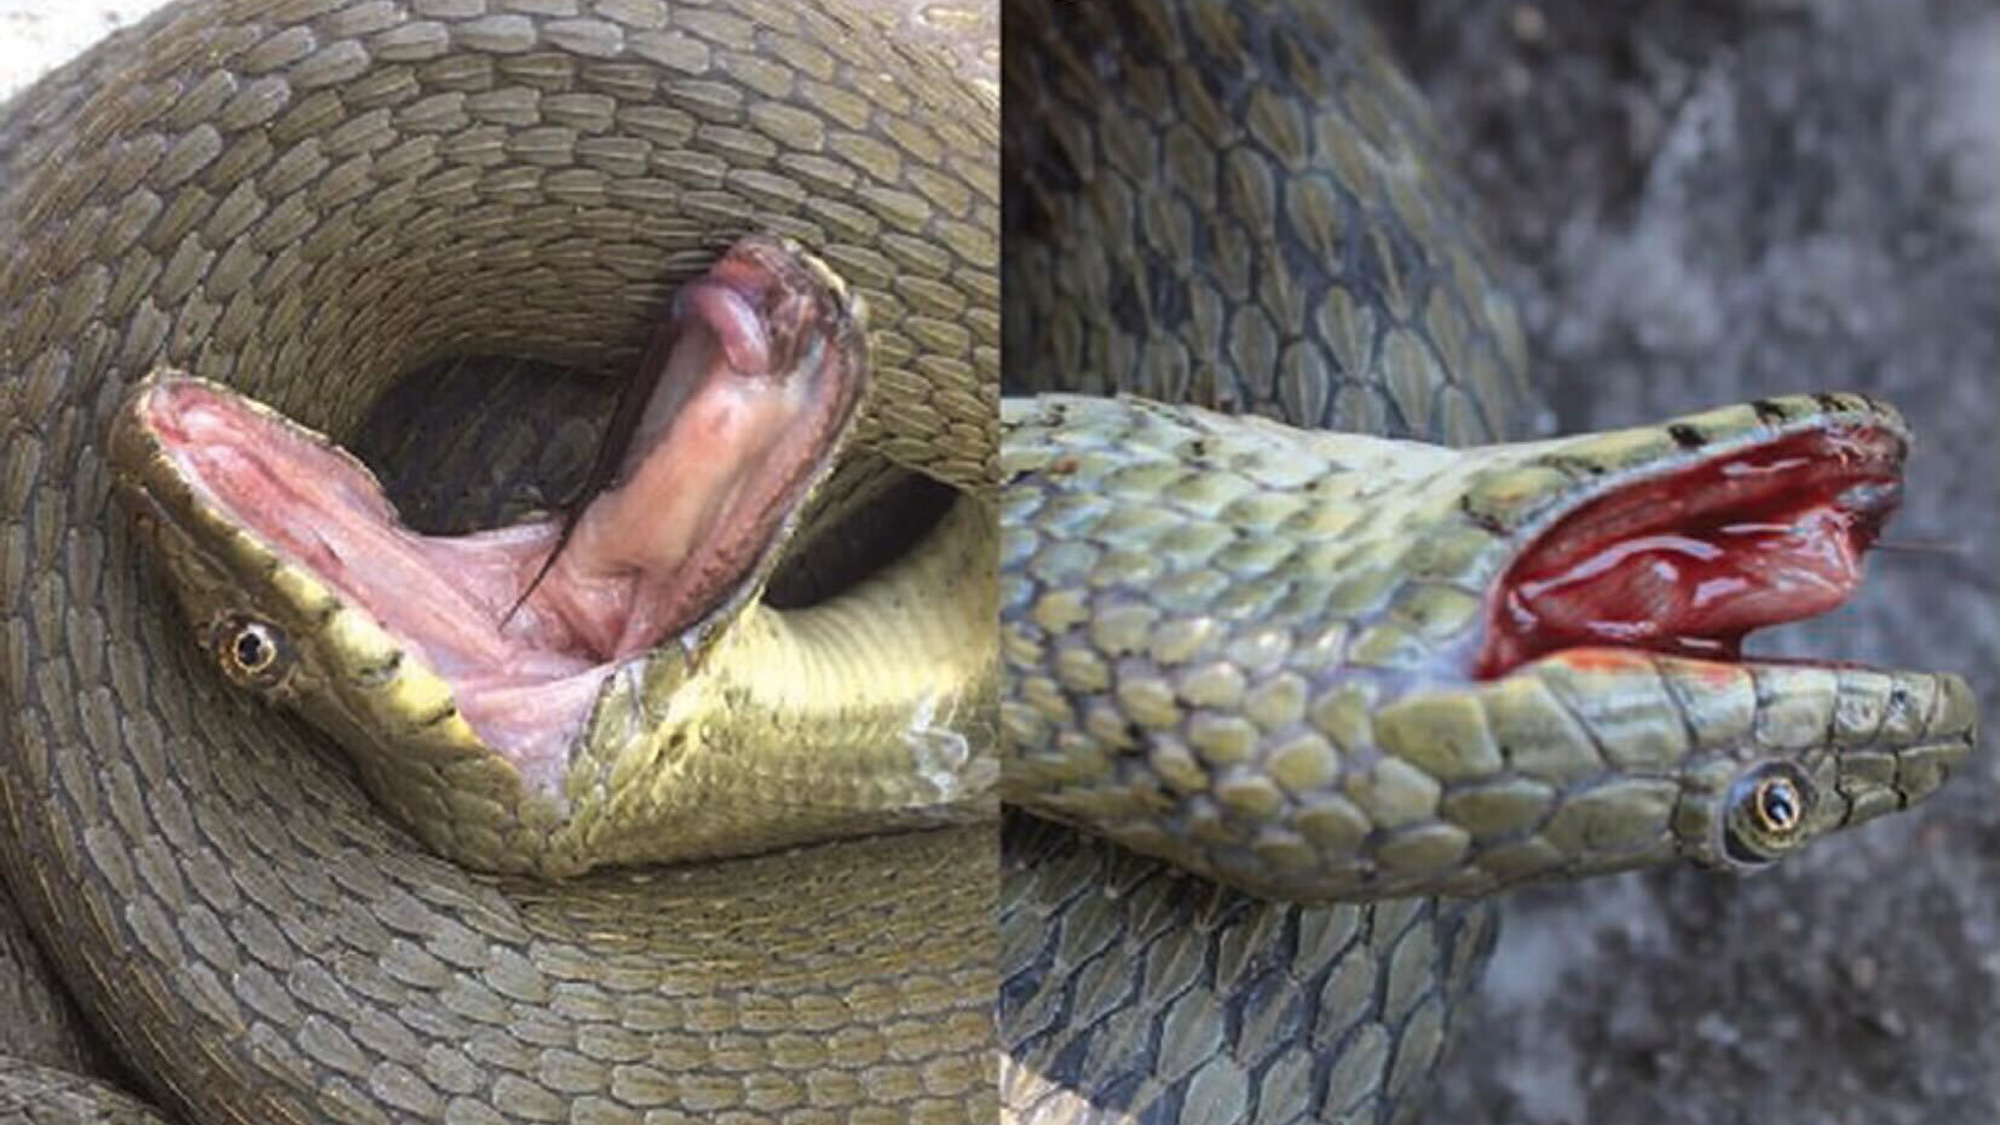 These snakes play dead, bleed, and poop to avoid being eaten